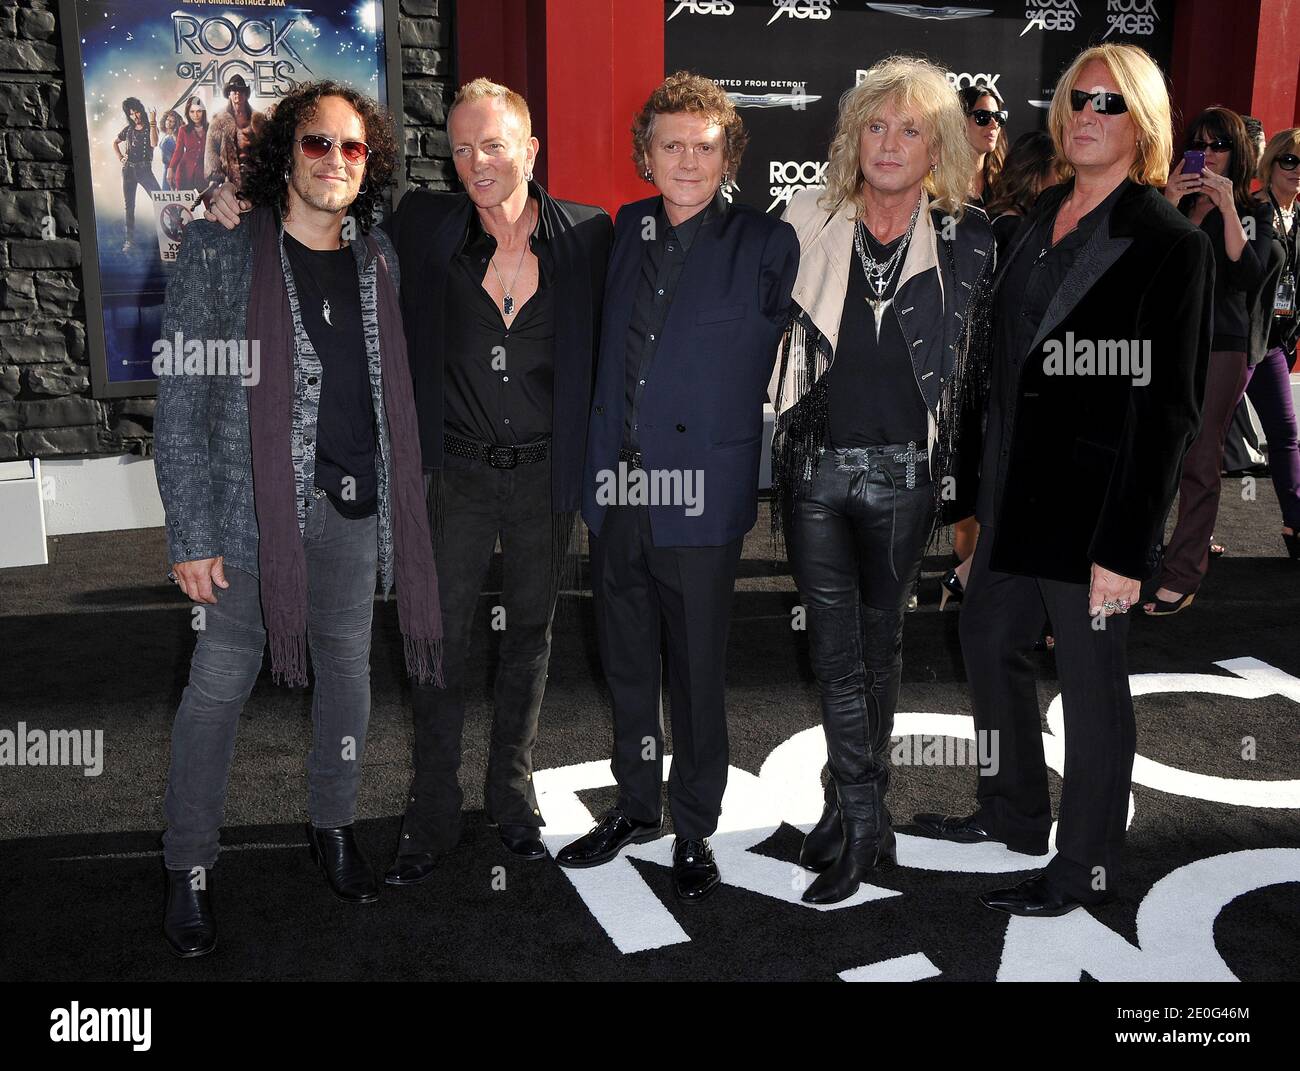 Def Leppard Phill Collen, Rick Allen, Rick Savage, Joe Elliott,Vivian Campbell arrive at the premiere of Warner Bros. Pictures' 'Rock of Ages' at Grauman's Chinese Theatre on June 8, 2012 in Los Angeles, CA, USA. Photo by Lionel Hahn/ABACAPRESS.COM Stock Photo